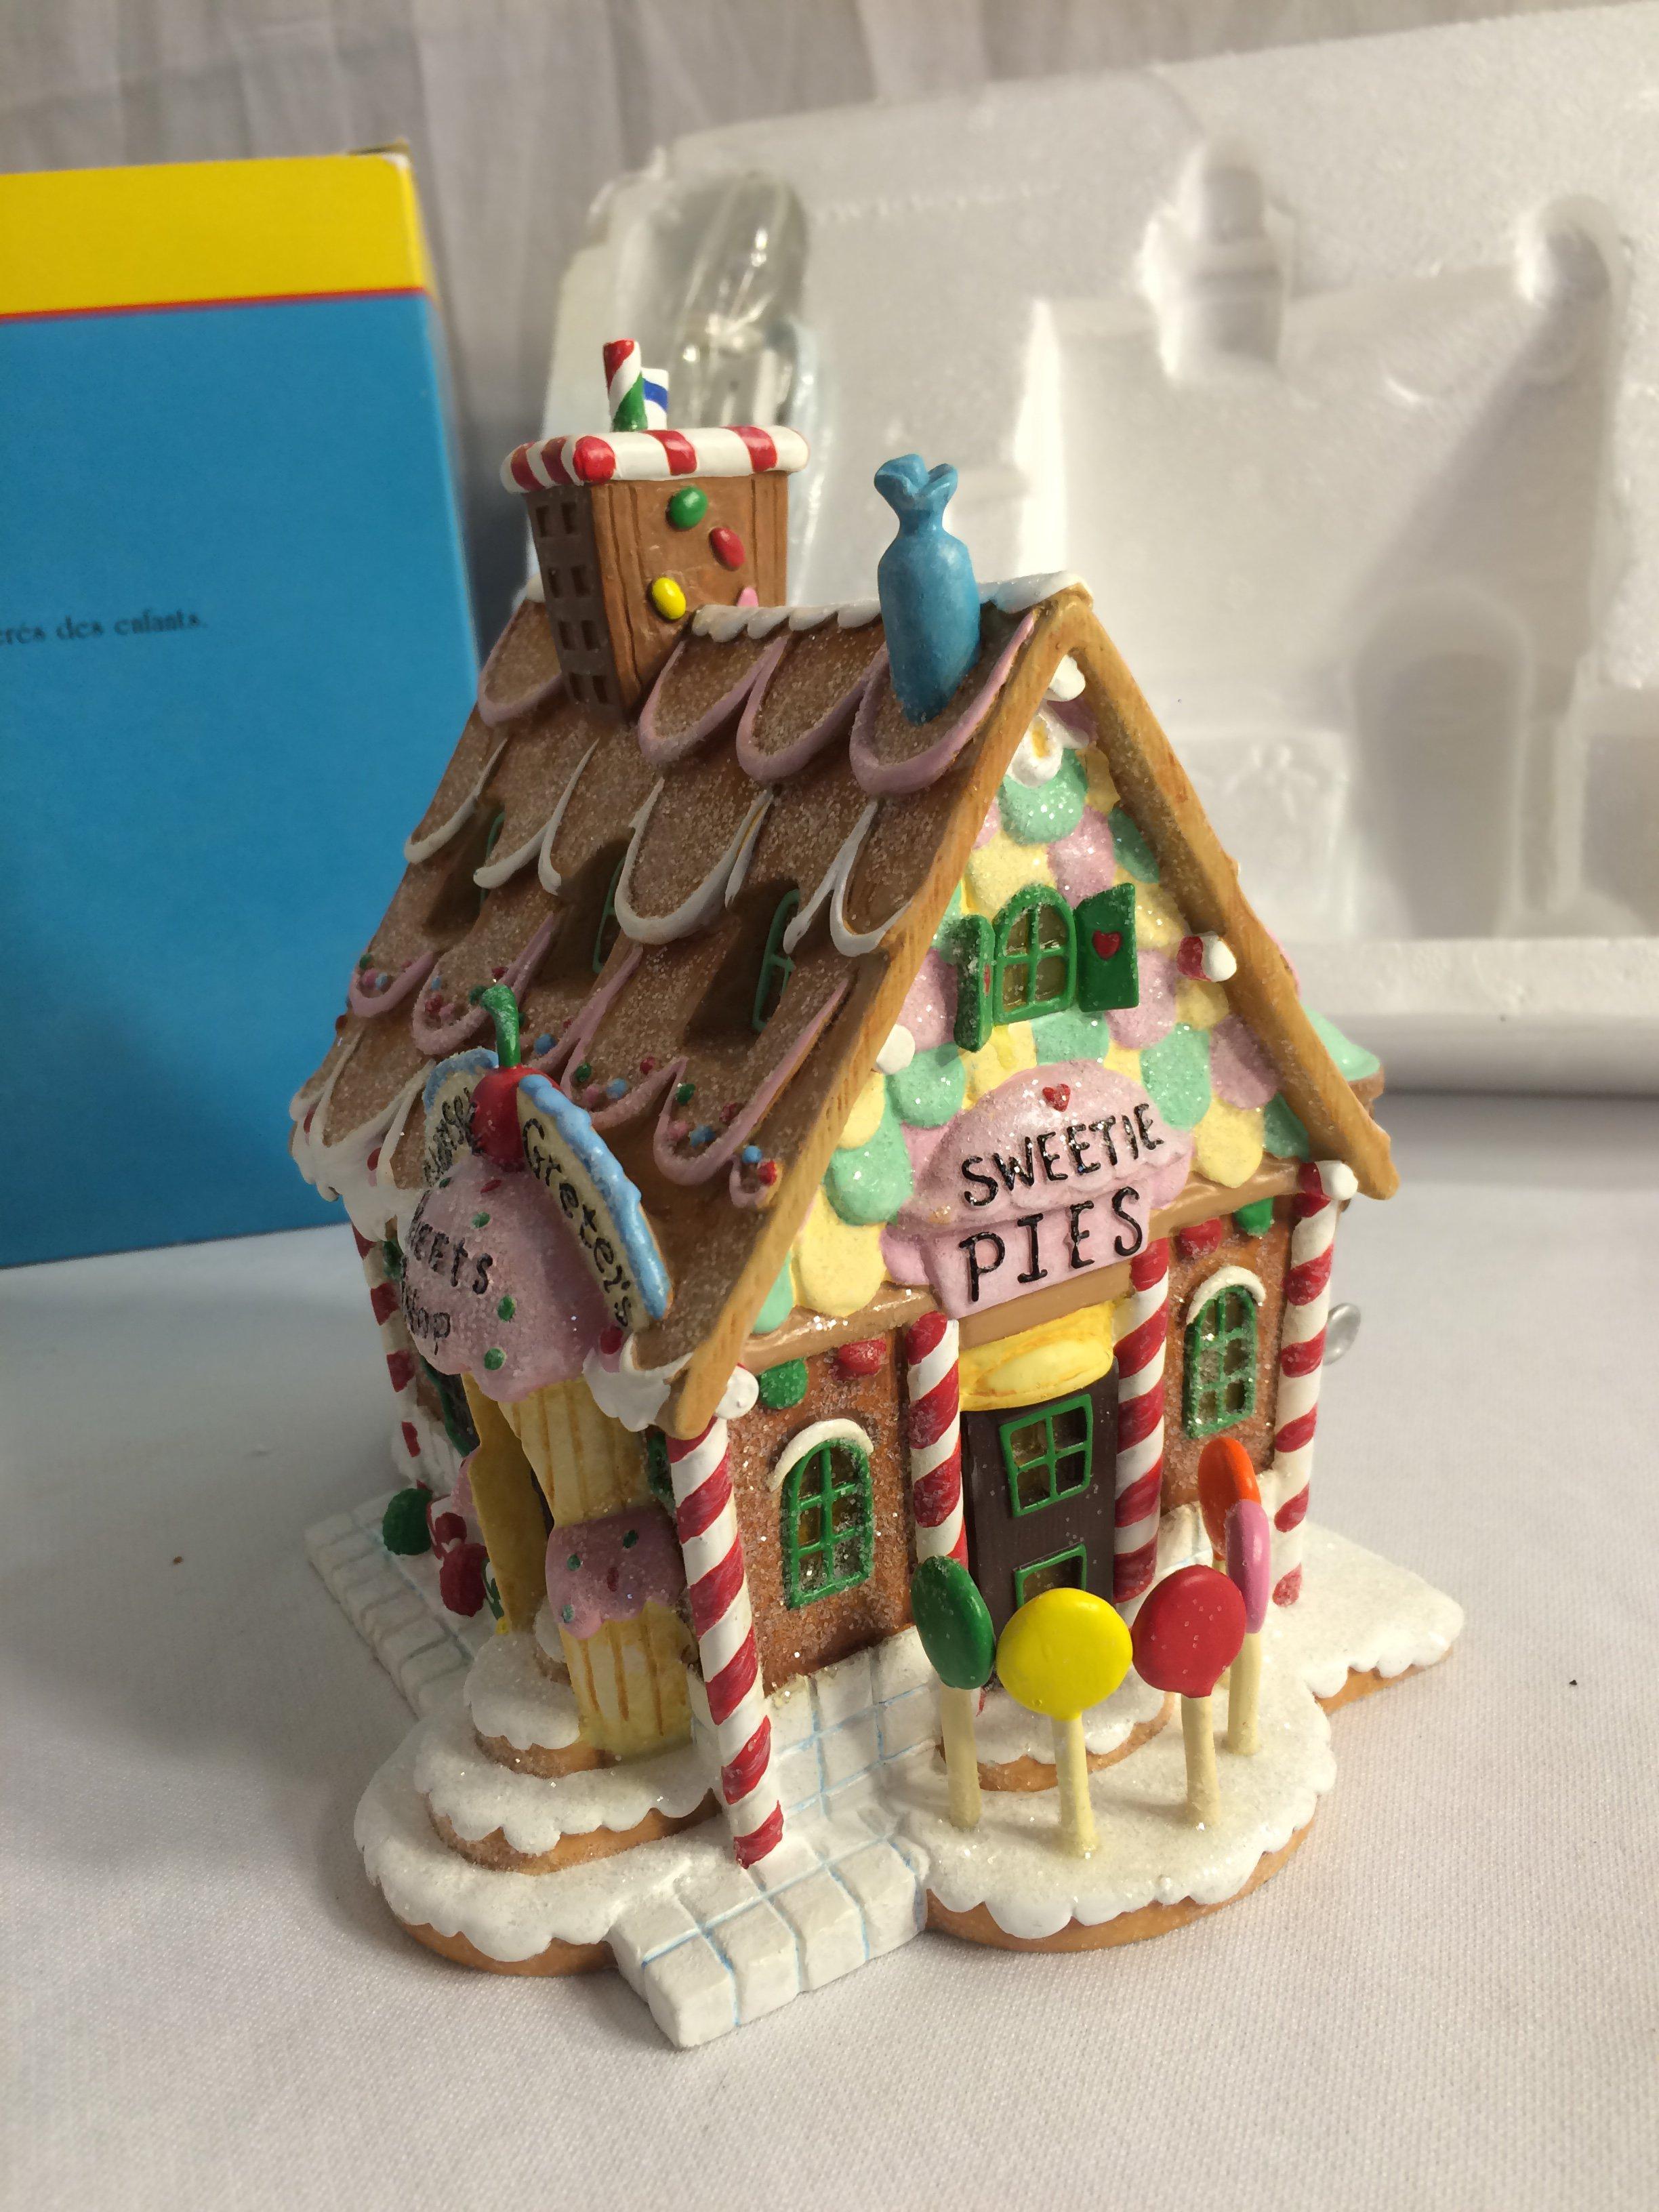 Storybook Village Collection "Hansel & Gretel's Sweets Shop" 56.13210 Handpainted Lighted Building